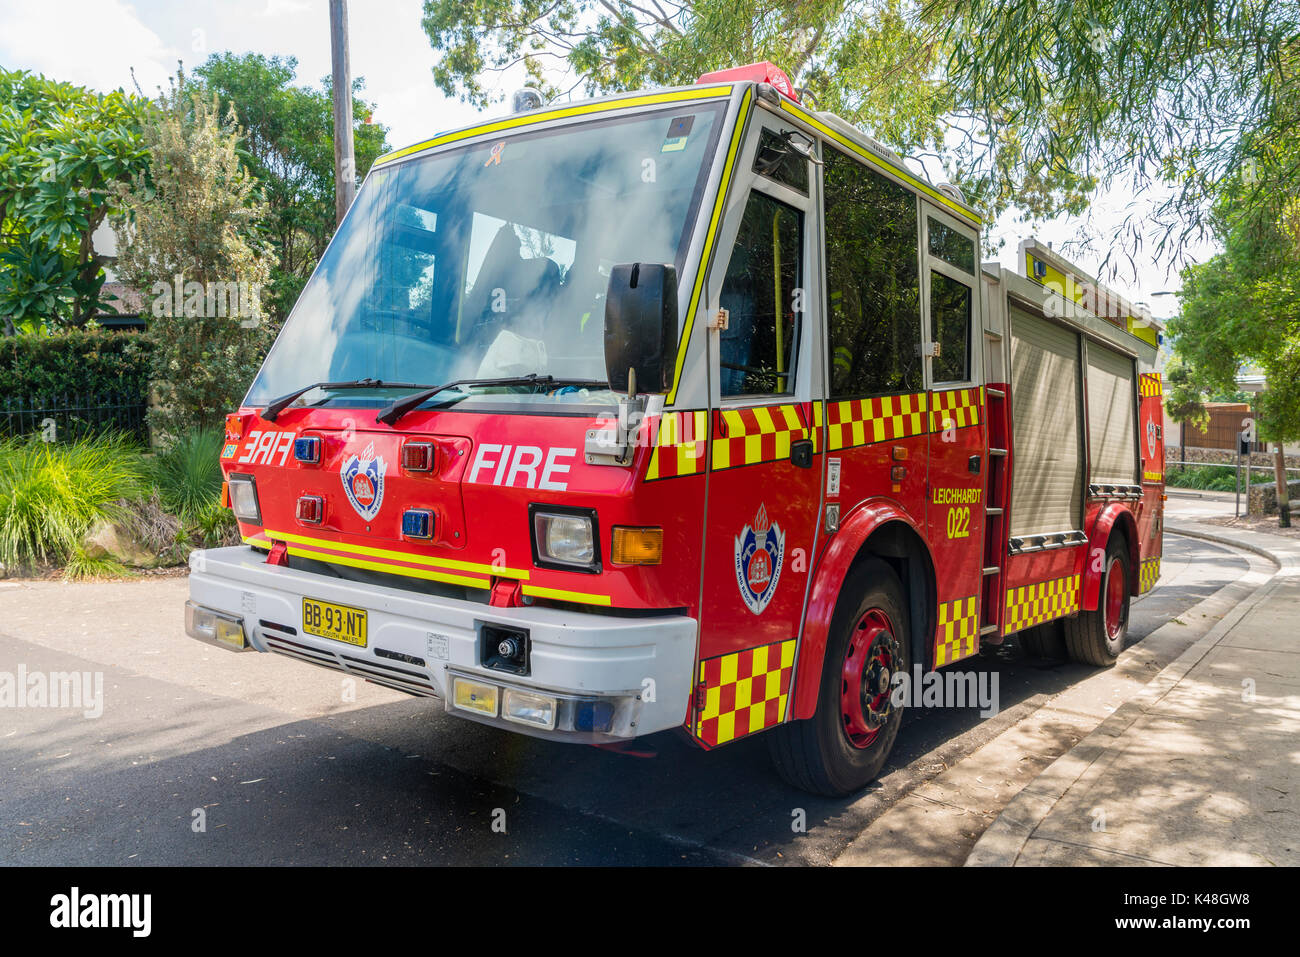 Sydney, Australia - May 11, 2017: Fire truck from the Fire and Rescue NSW, which is responsible for firefighting and rescue in New South Wales, Austra Stock Photo